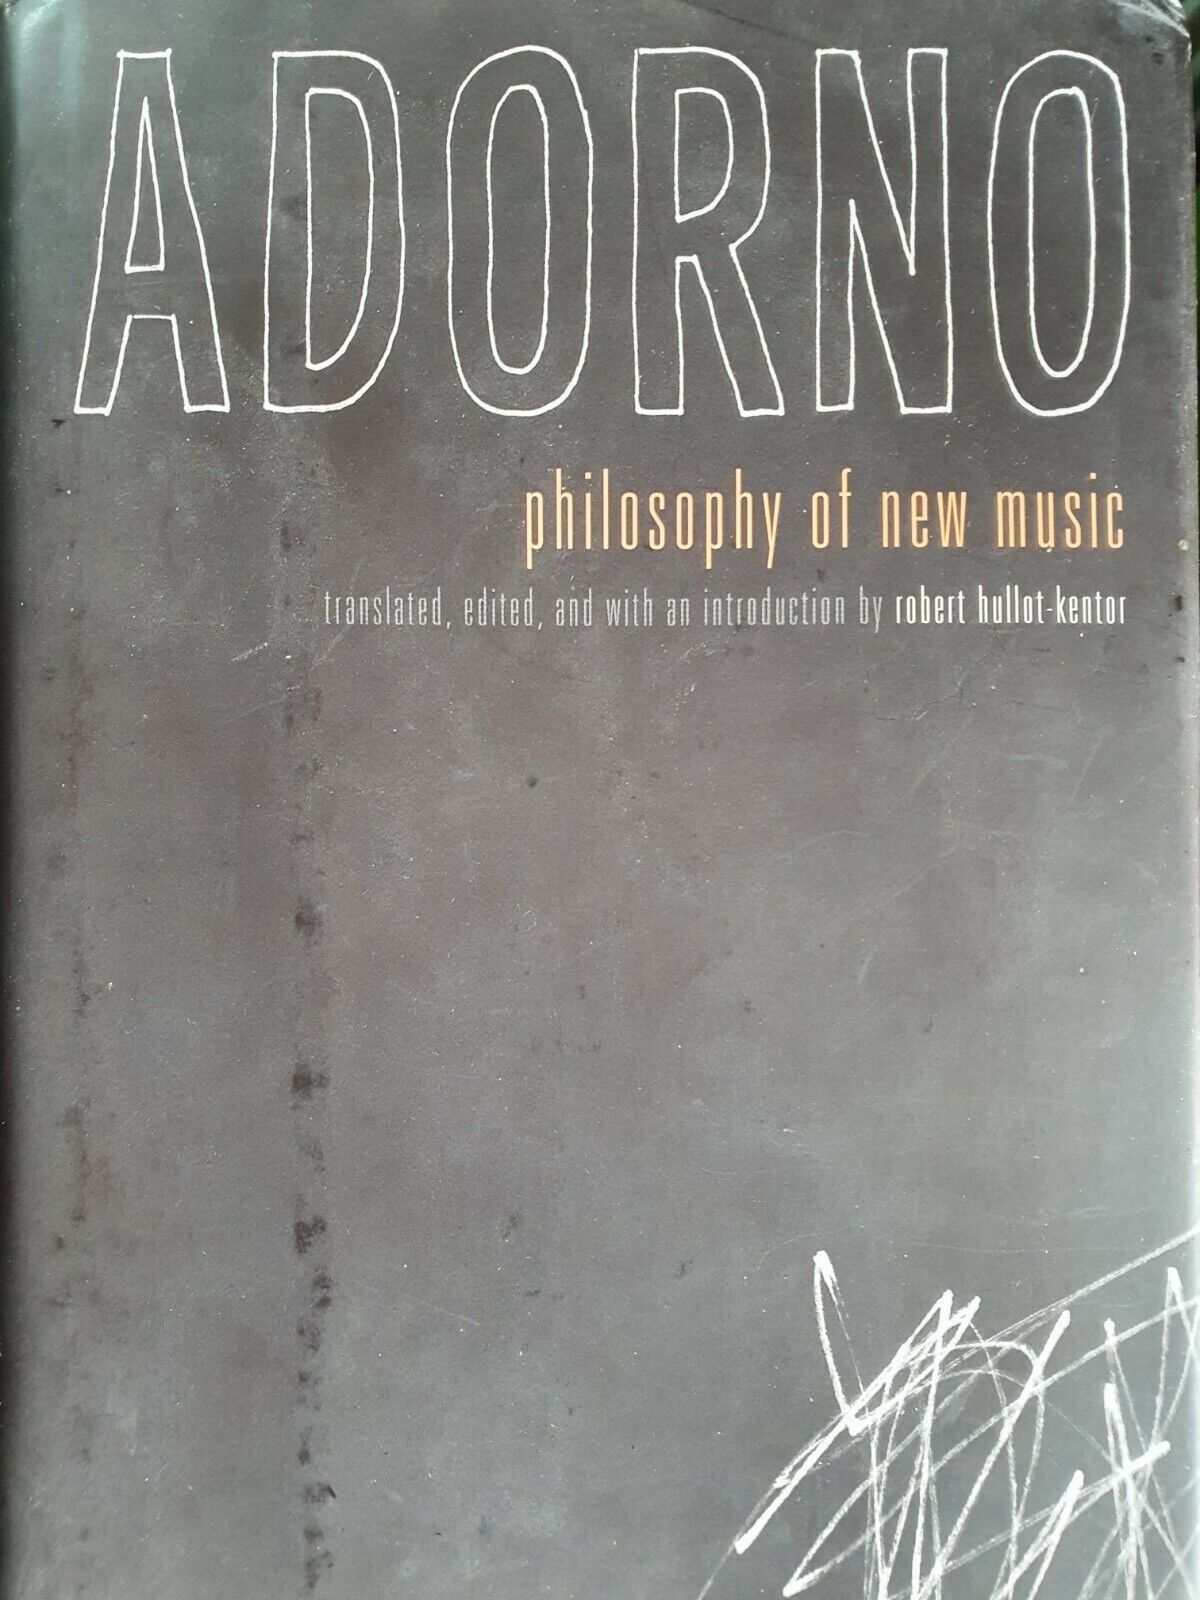 Adorno for Revolutionaries. On the 75 Anniversary of Philosophy of New Music